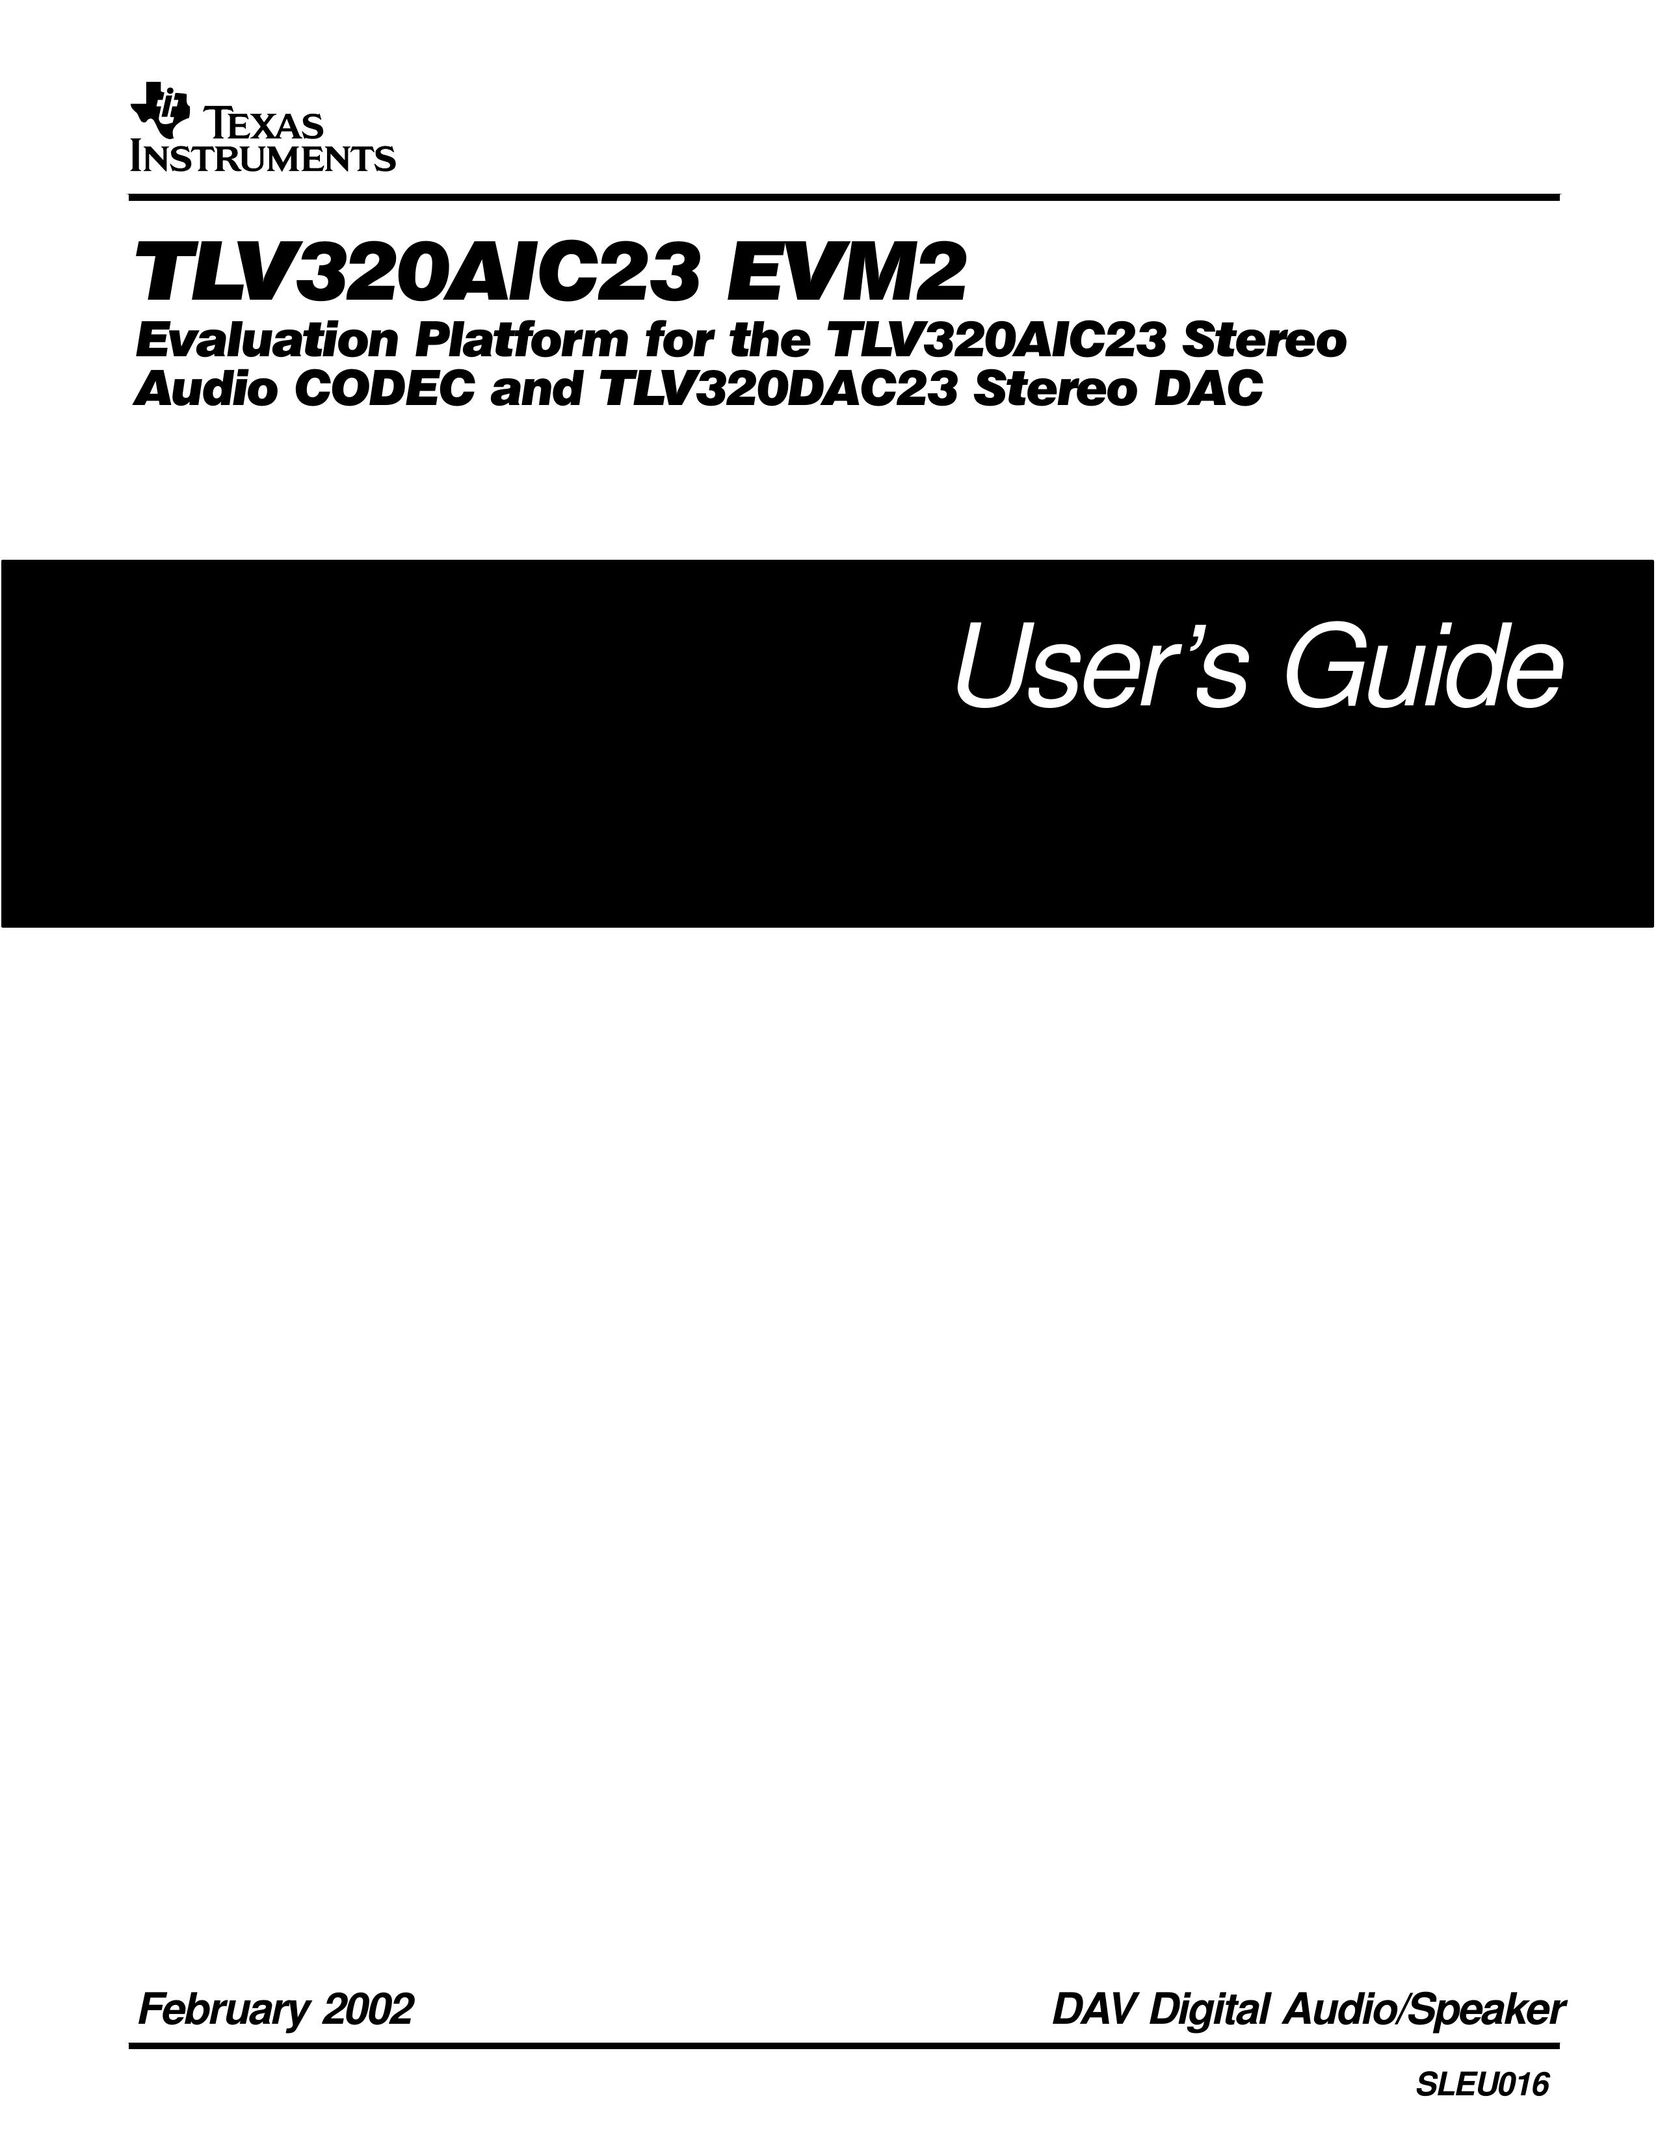 Texas Instruments TLV320DAC23 Conference Phone User Manual